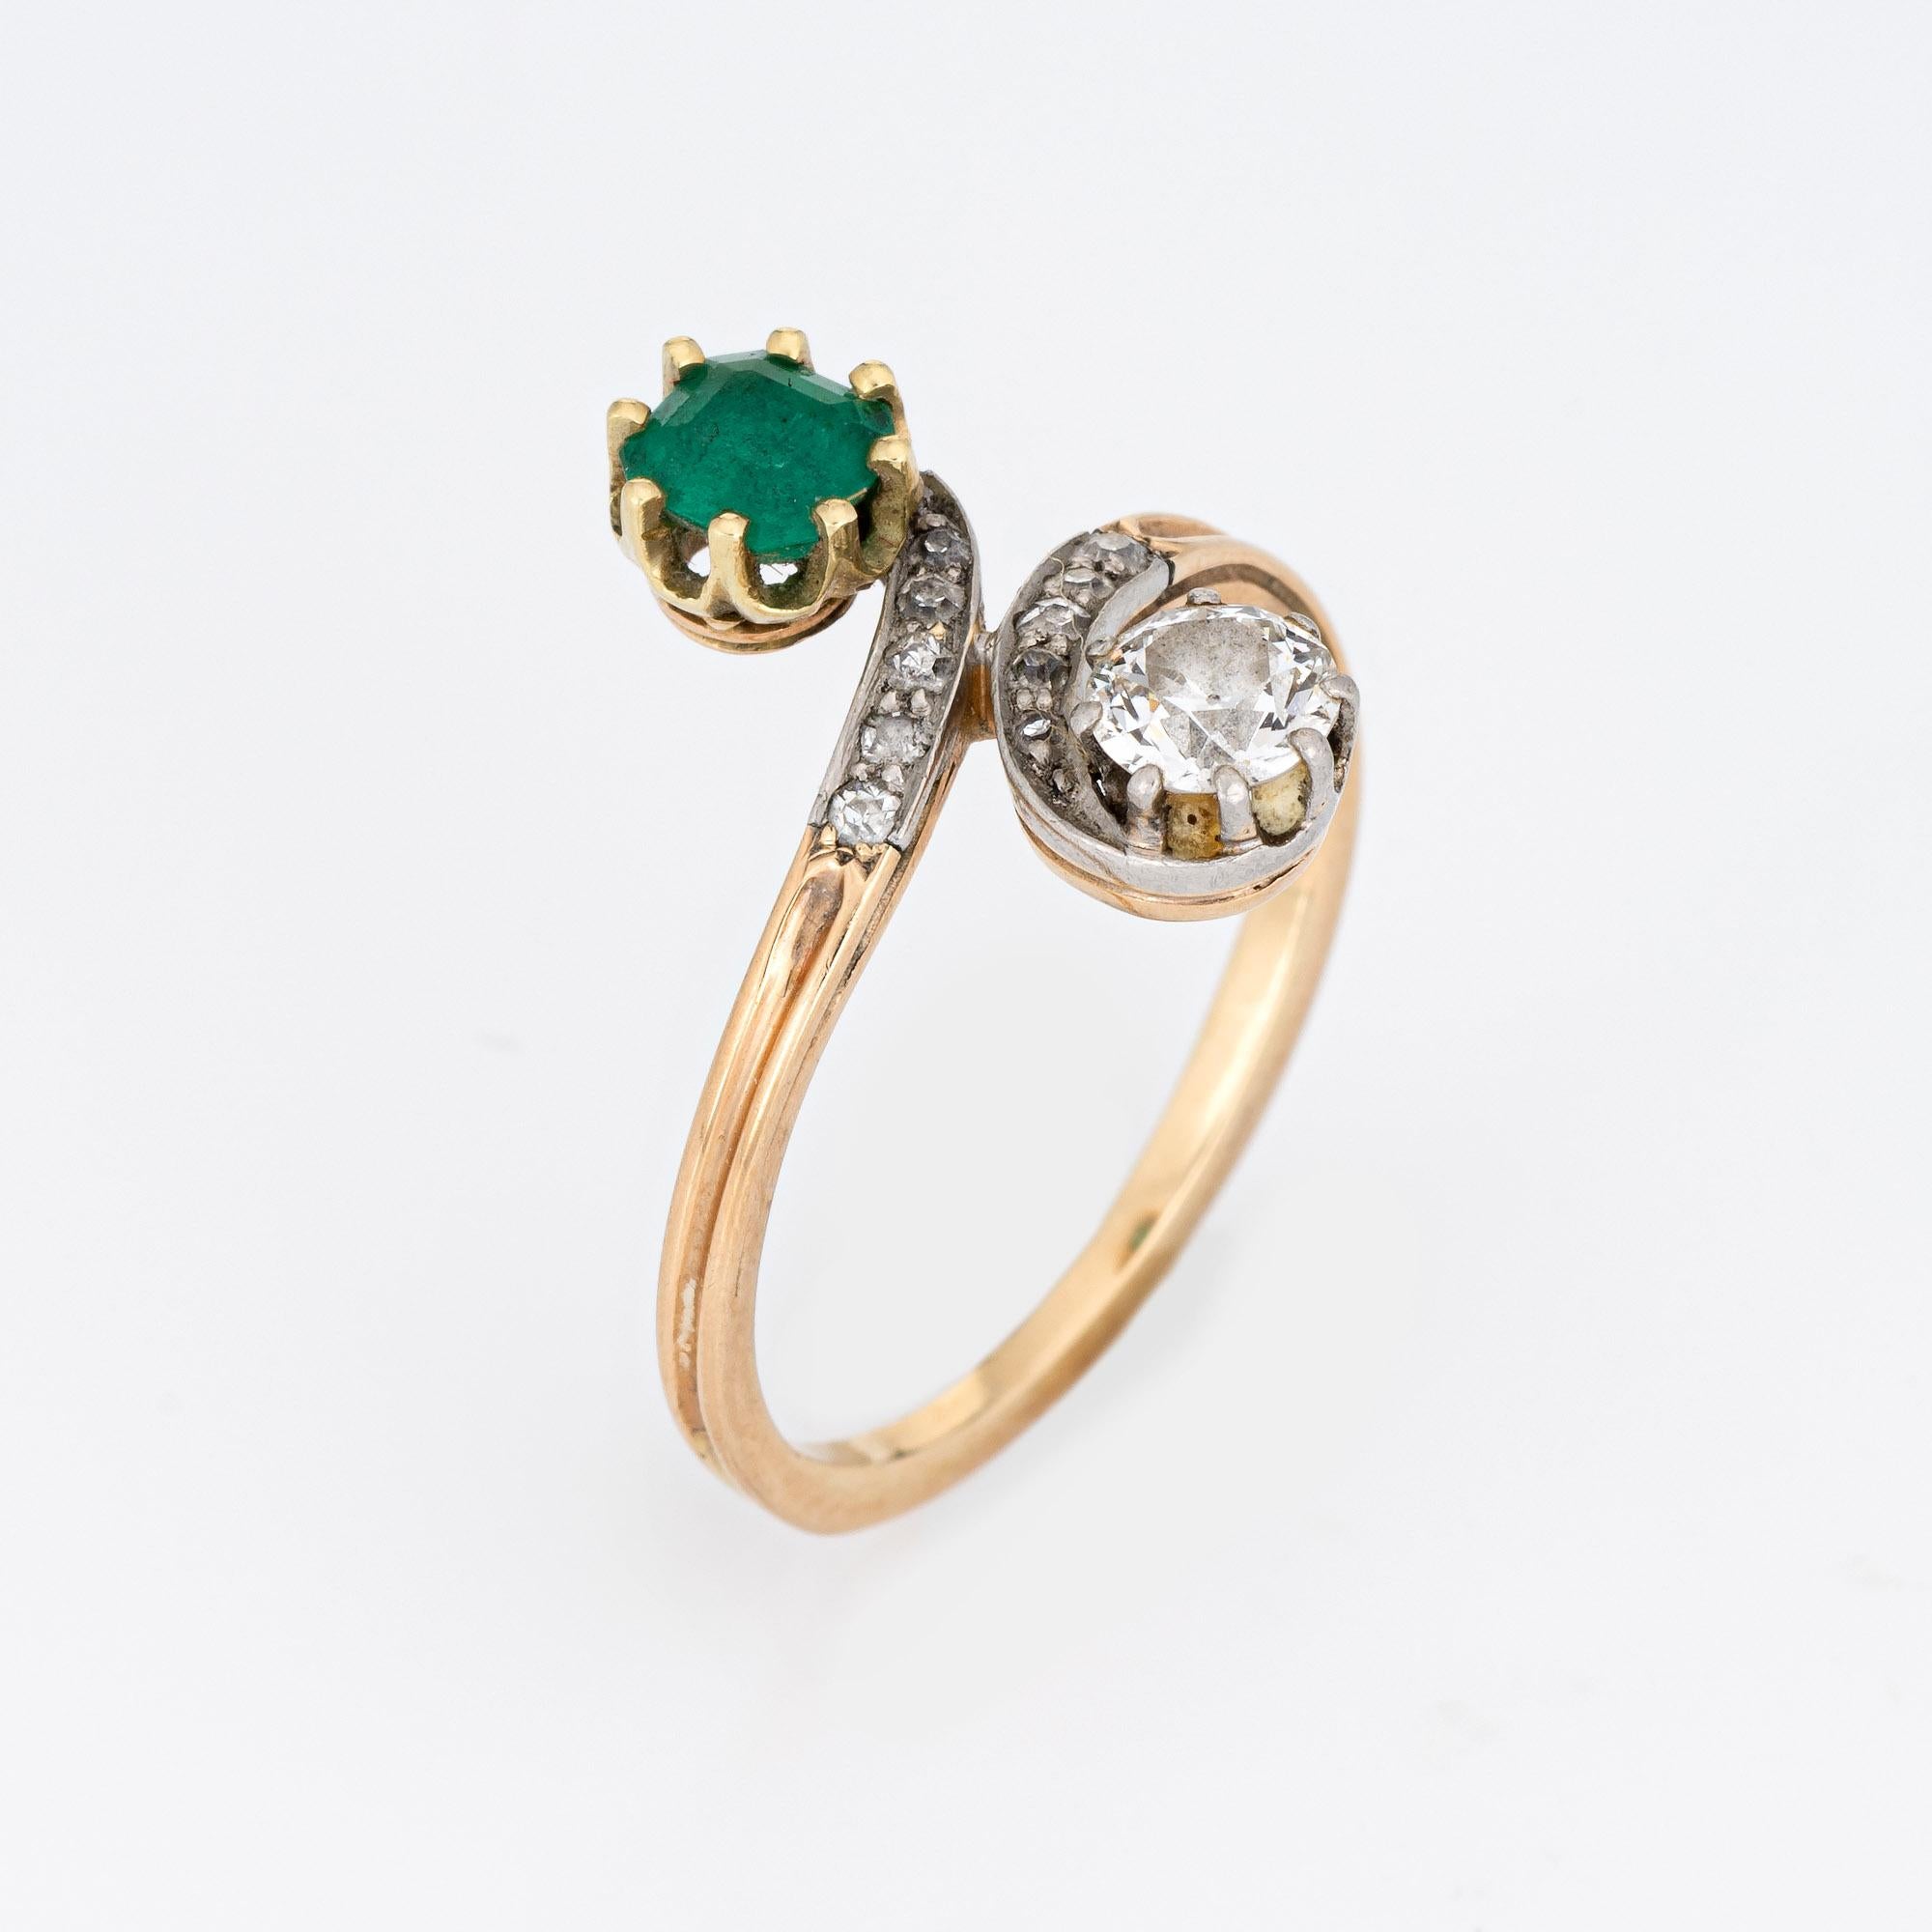 Finely detailed antique Edwardian diamond & emerald 'moi et toi' ring crafted in 14k yellow gold (circa 1910s to 1920s).  

The larger Old mine cut diamond is estimated at 0.40 carats, flanked with a further 9 estimated 0.01 carat old single cut